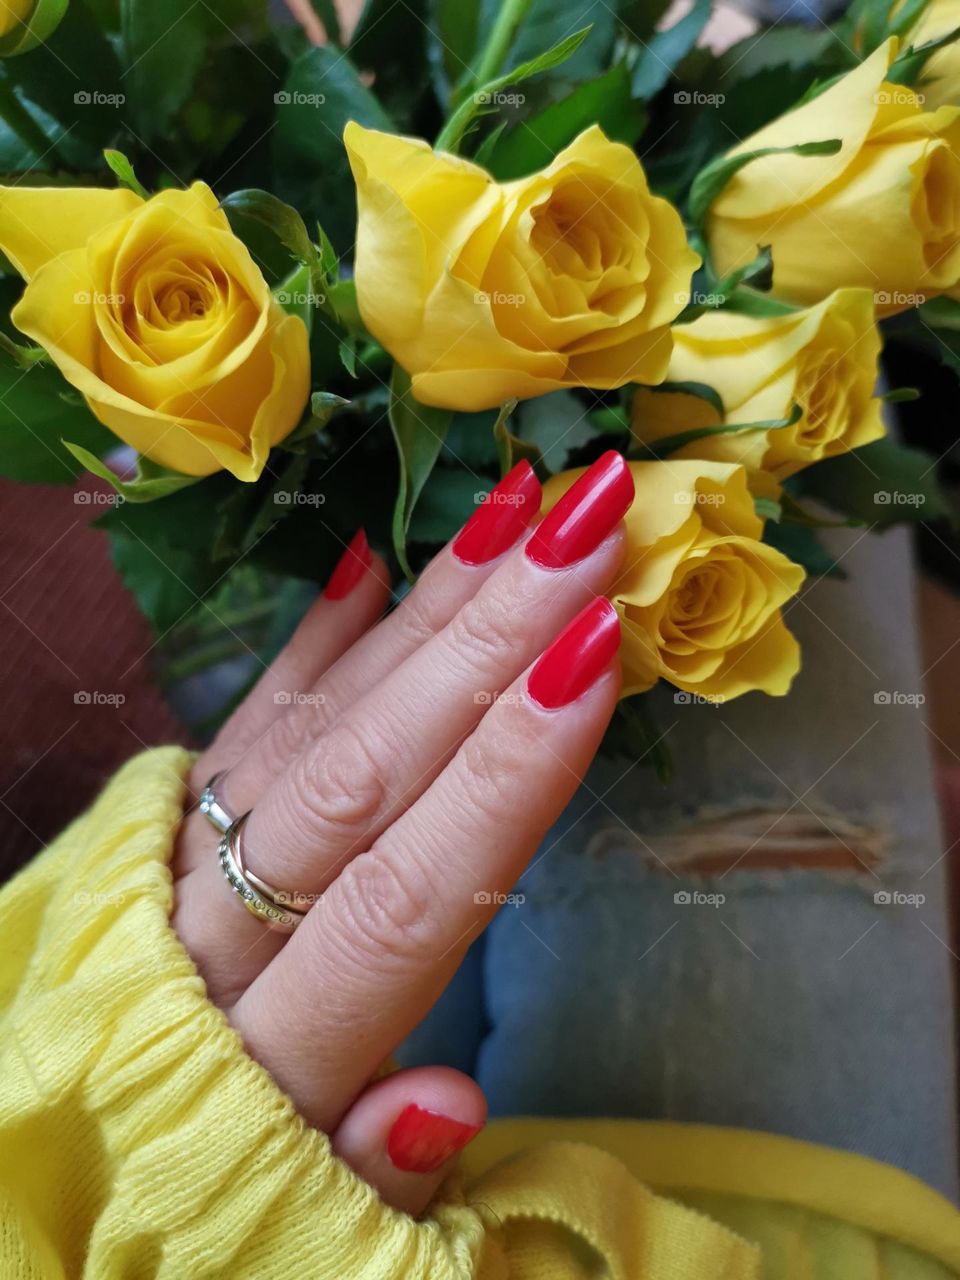 Red manicure, red nail polish. Hand with red manicure and yellow roses bouquet.